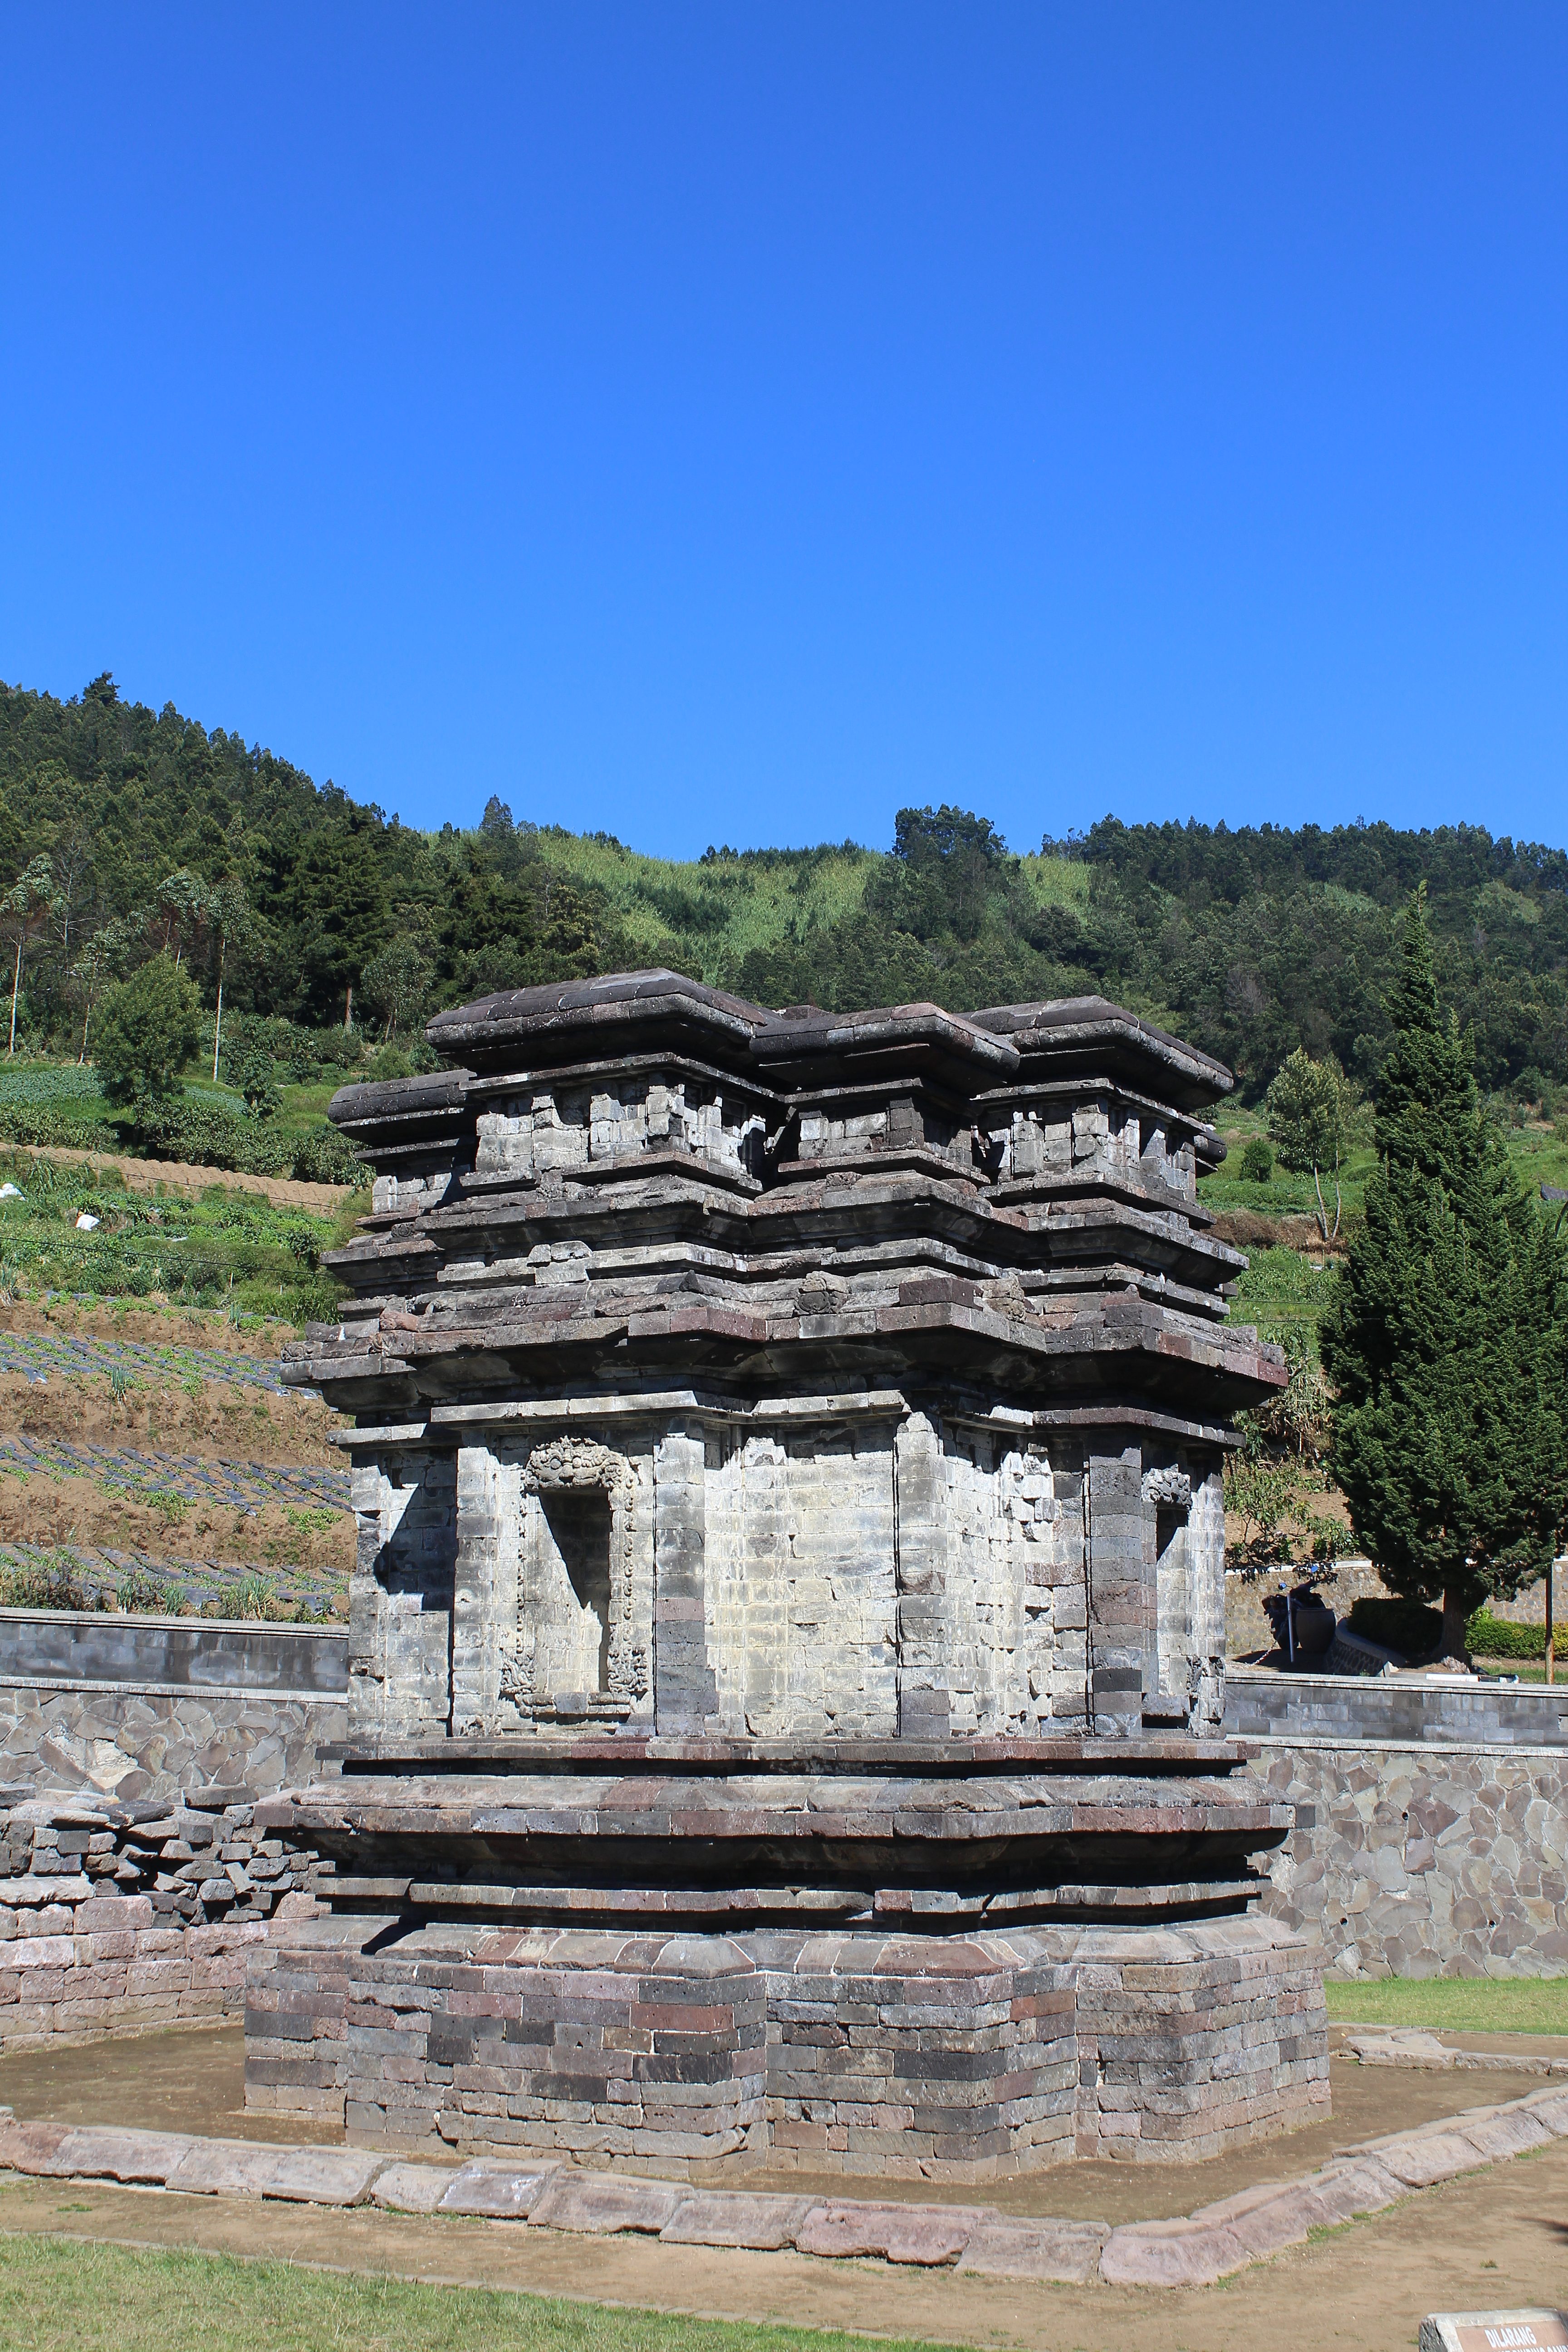 Flat shrine with green hills behind